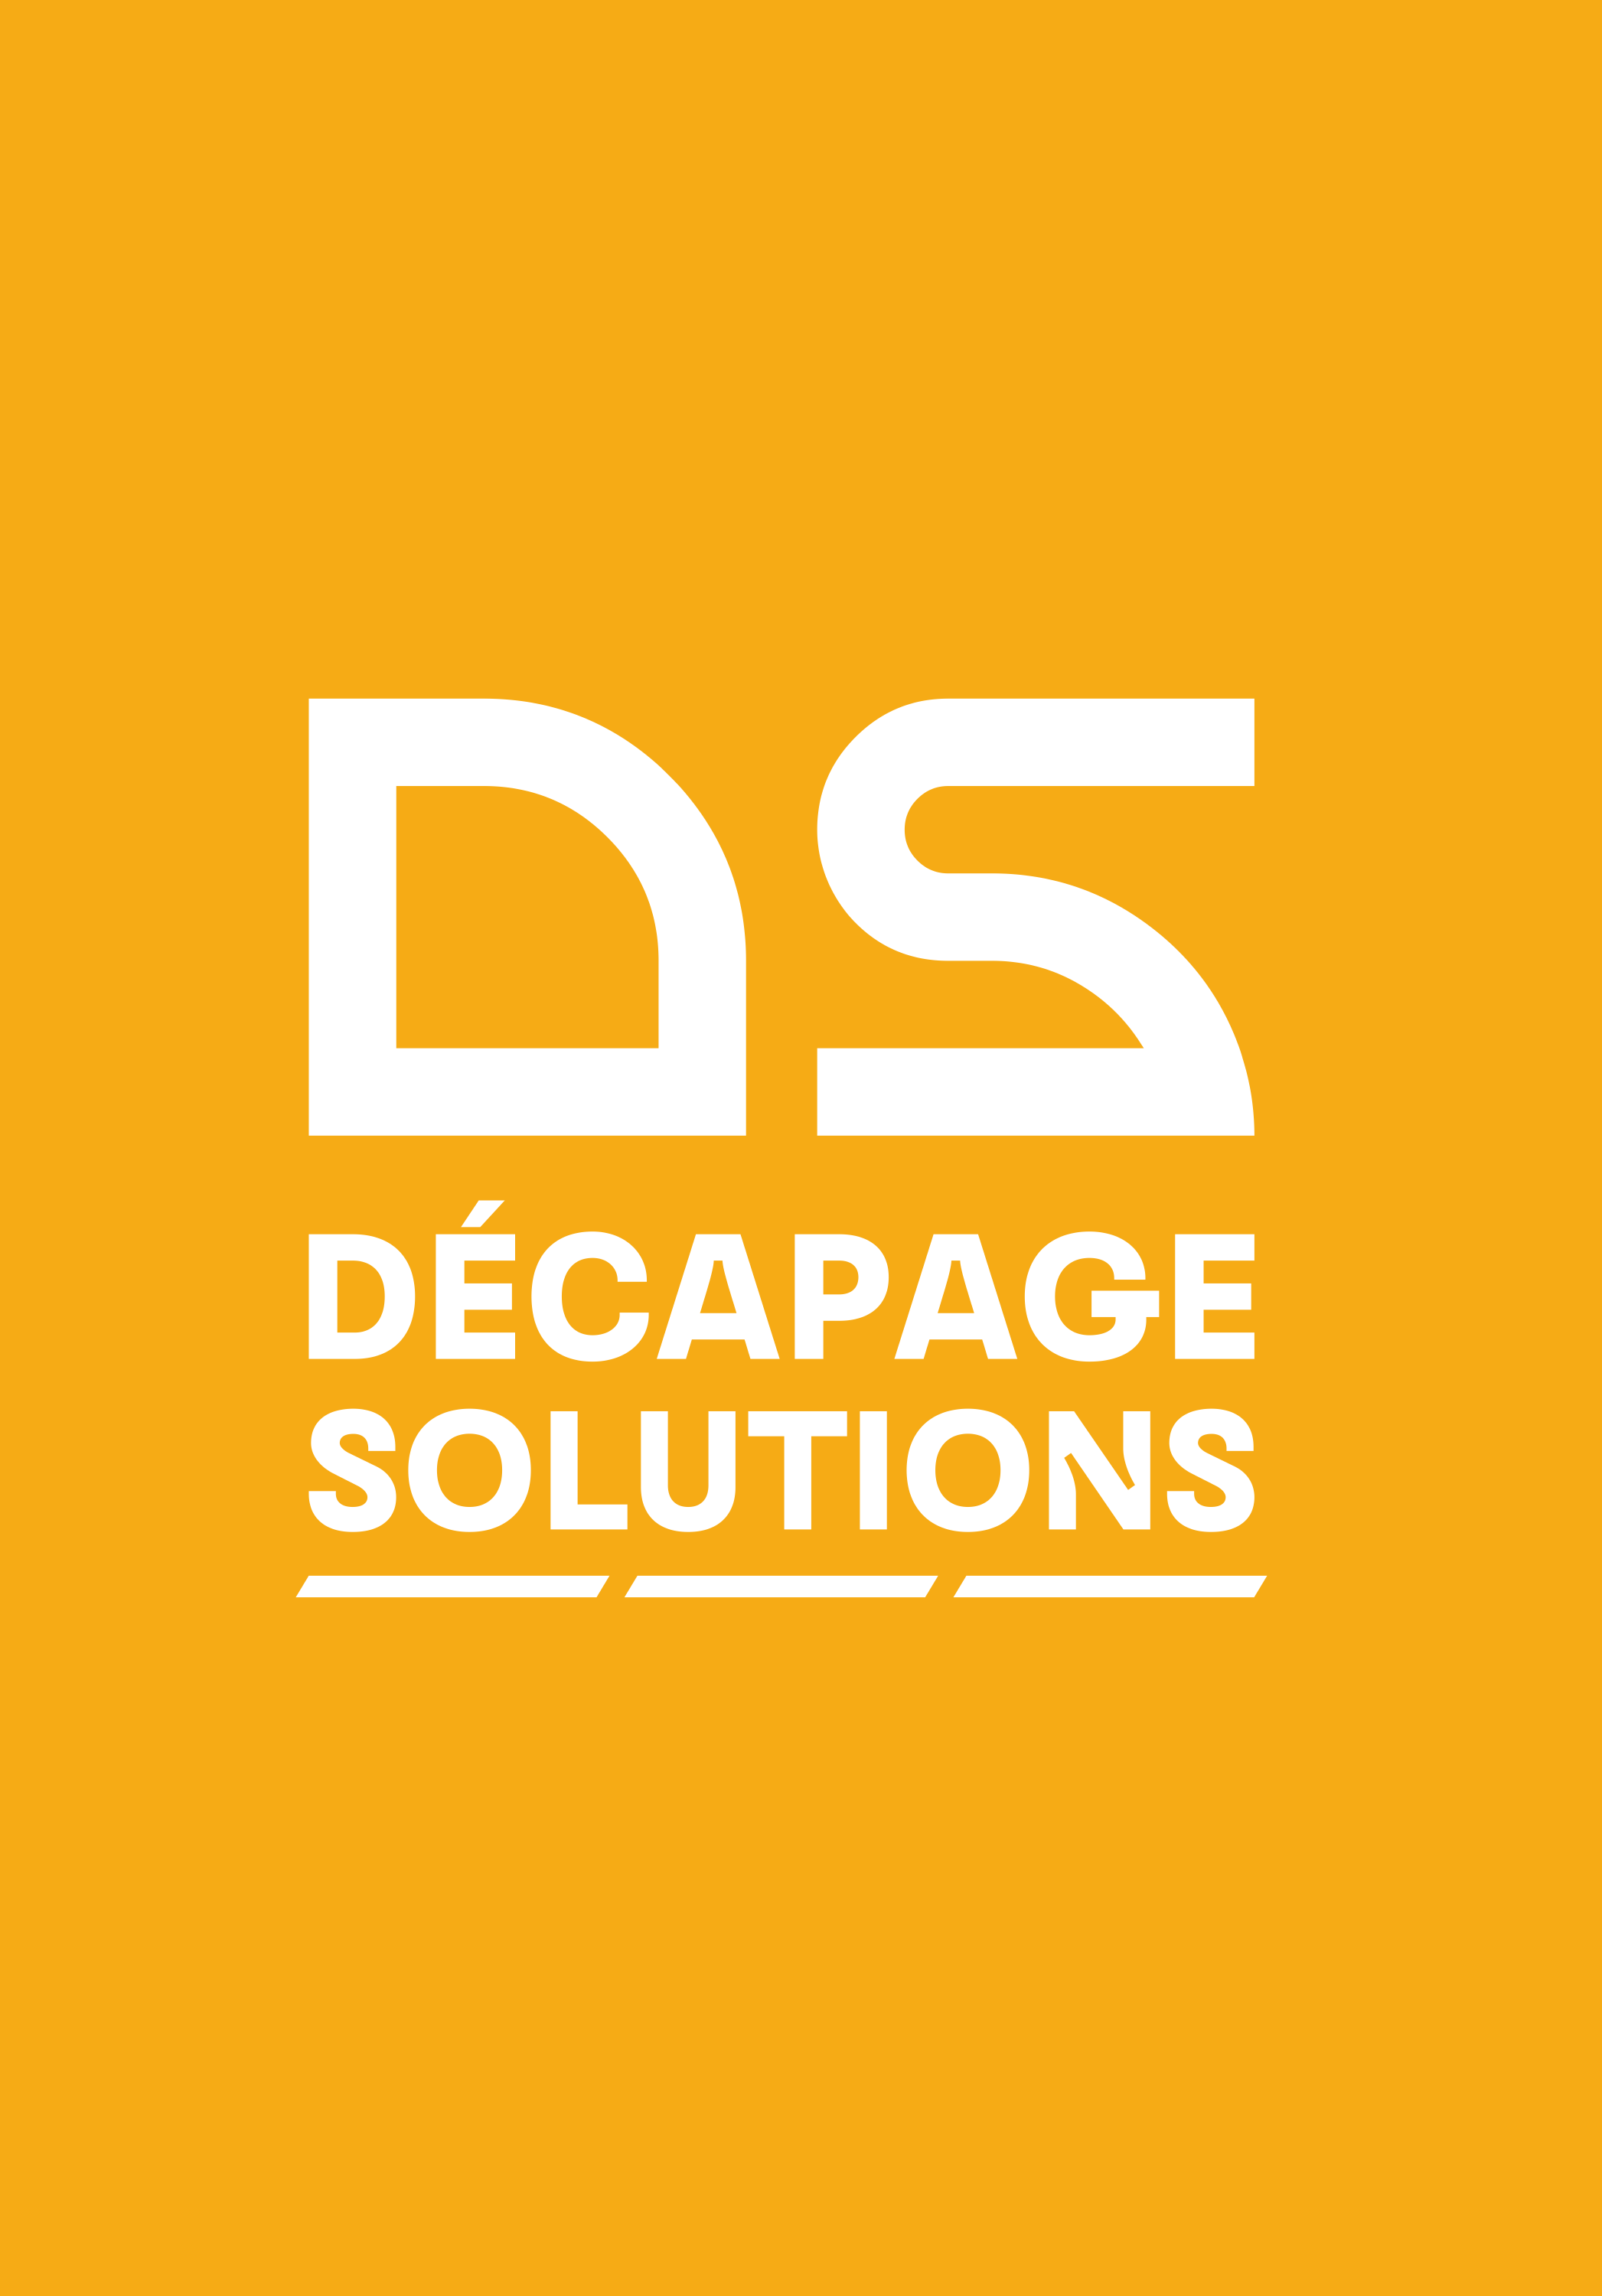 Décapage solutions